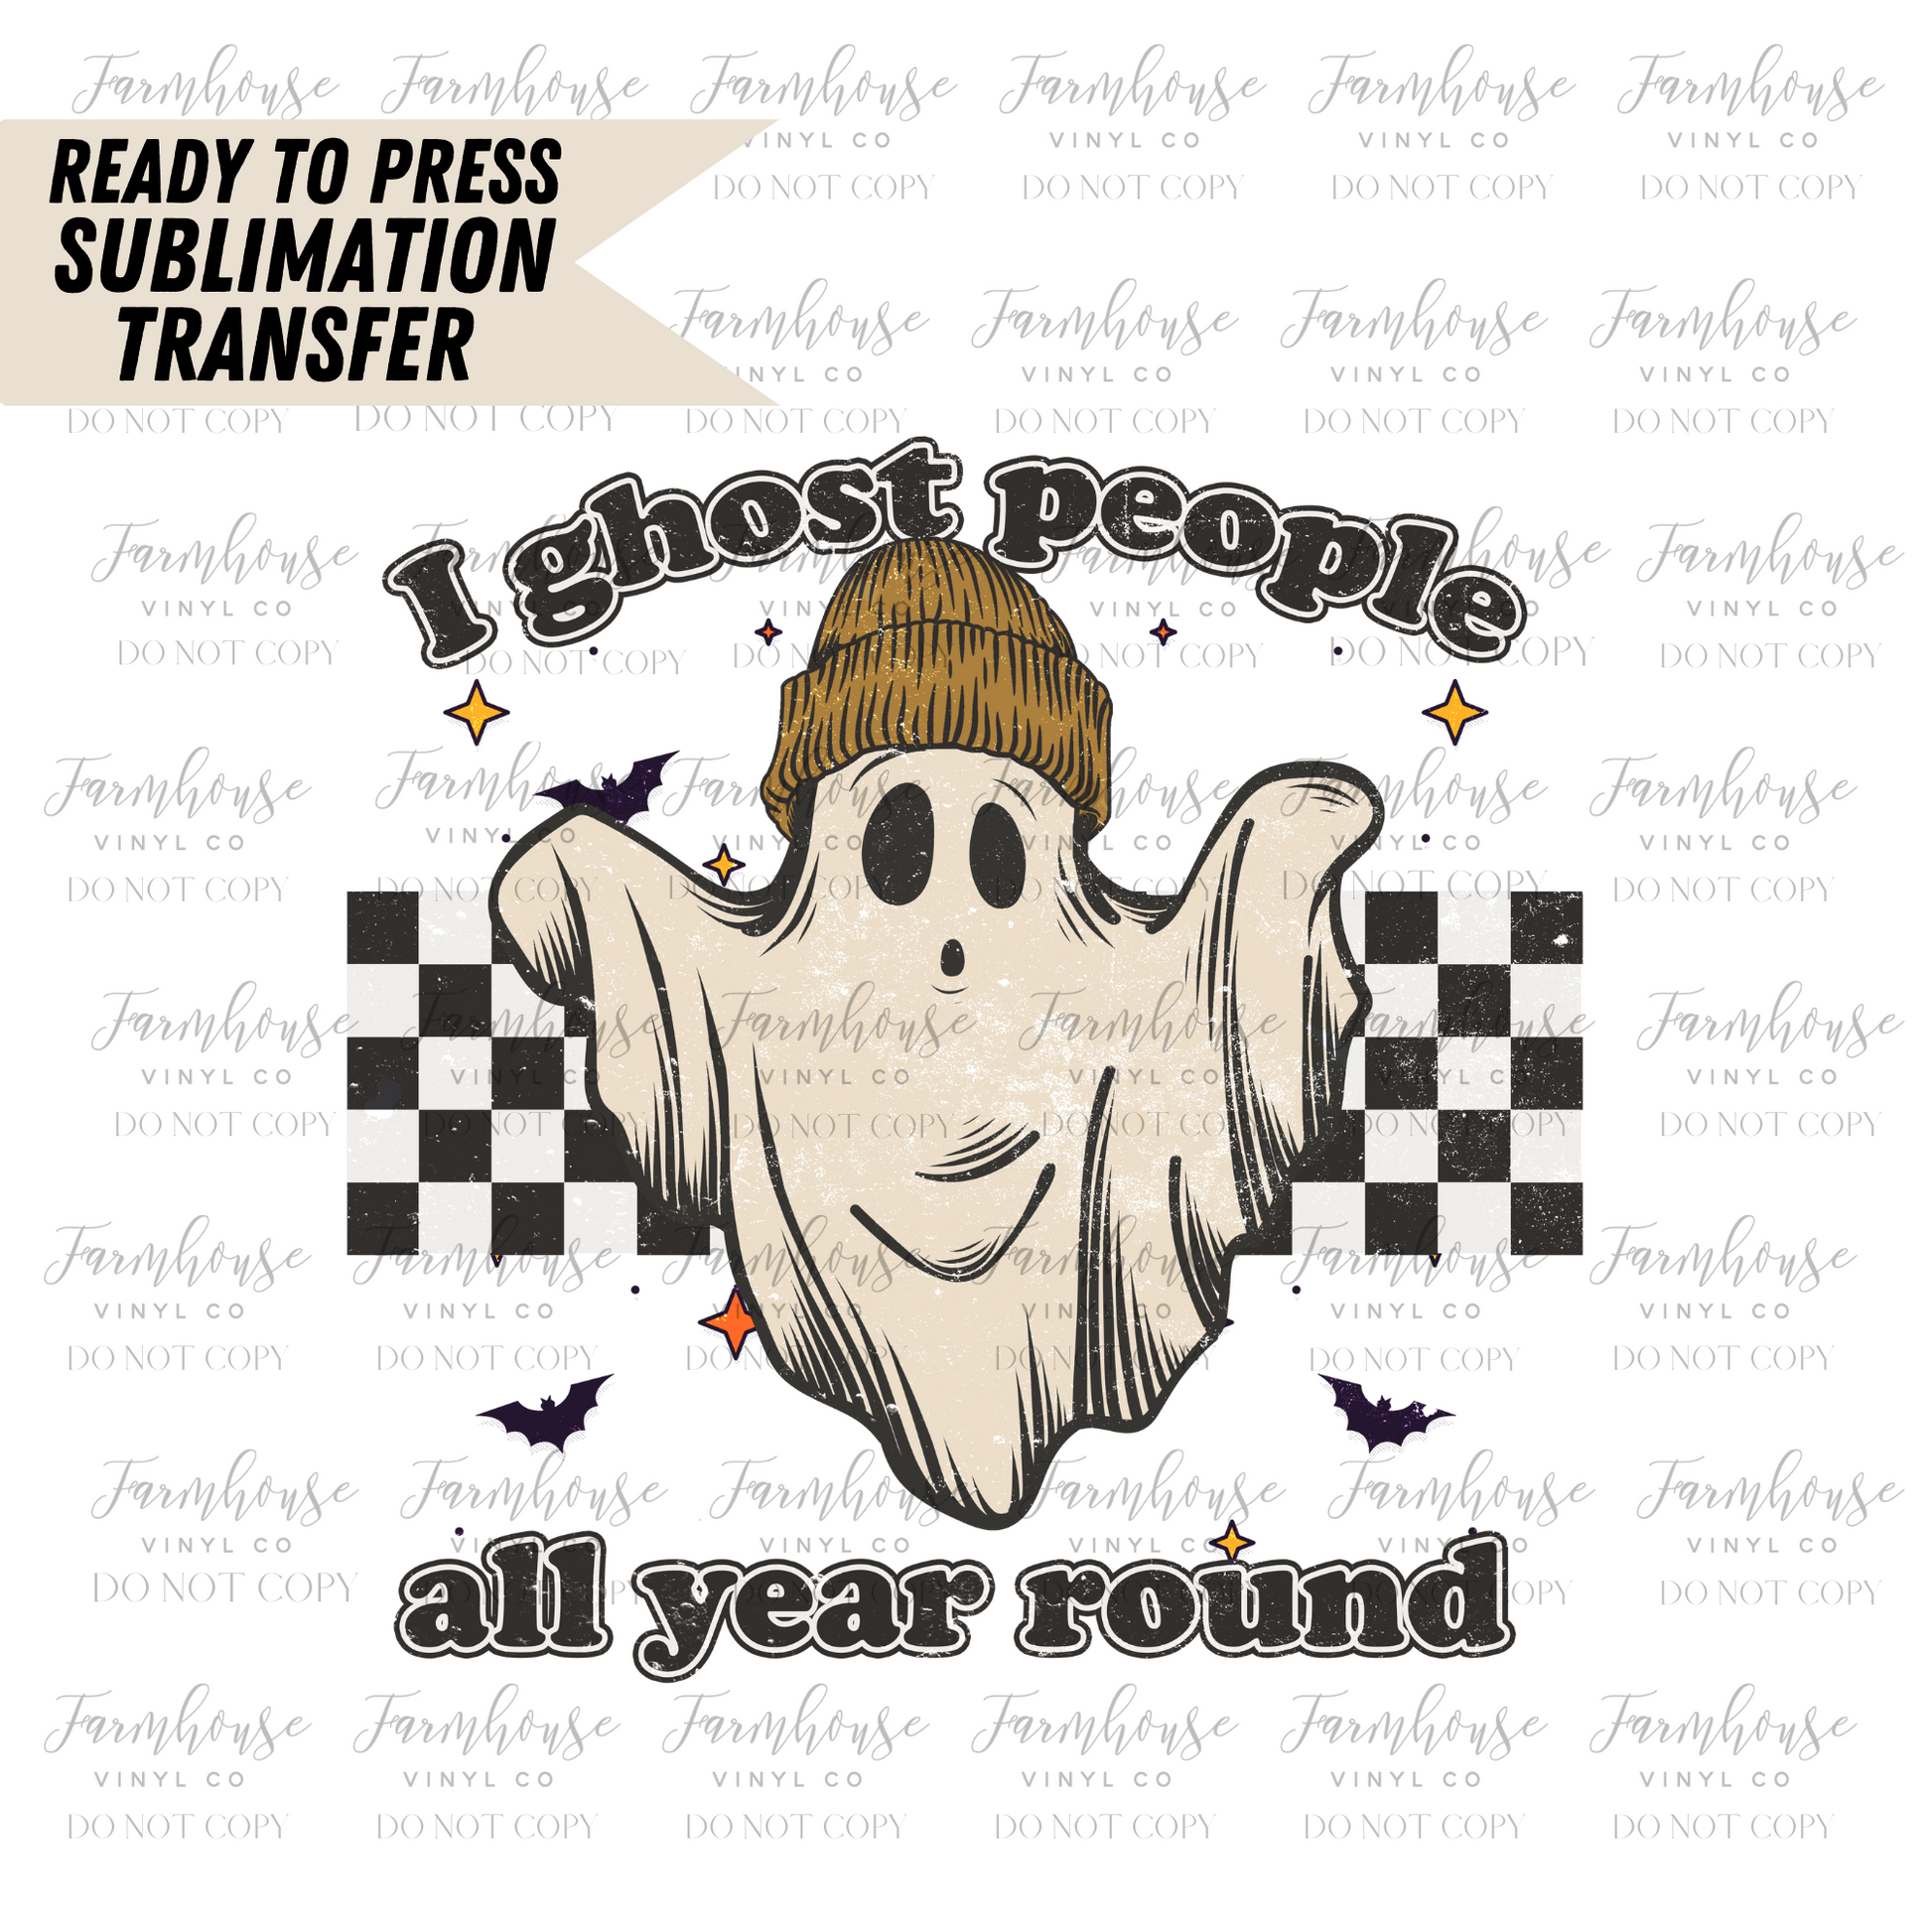 I Ghost People All Year Around Ready to Press Sublimation Transfer Design - Farmhouse Vinyl Co